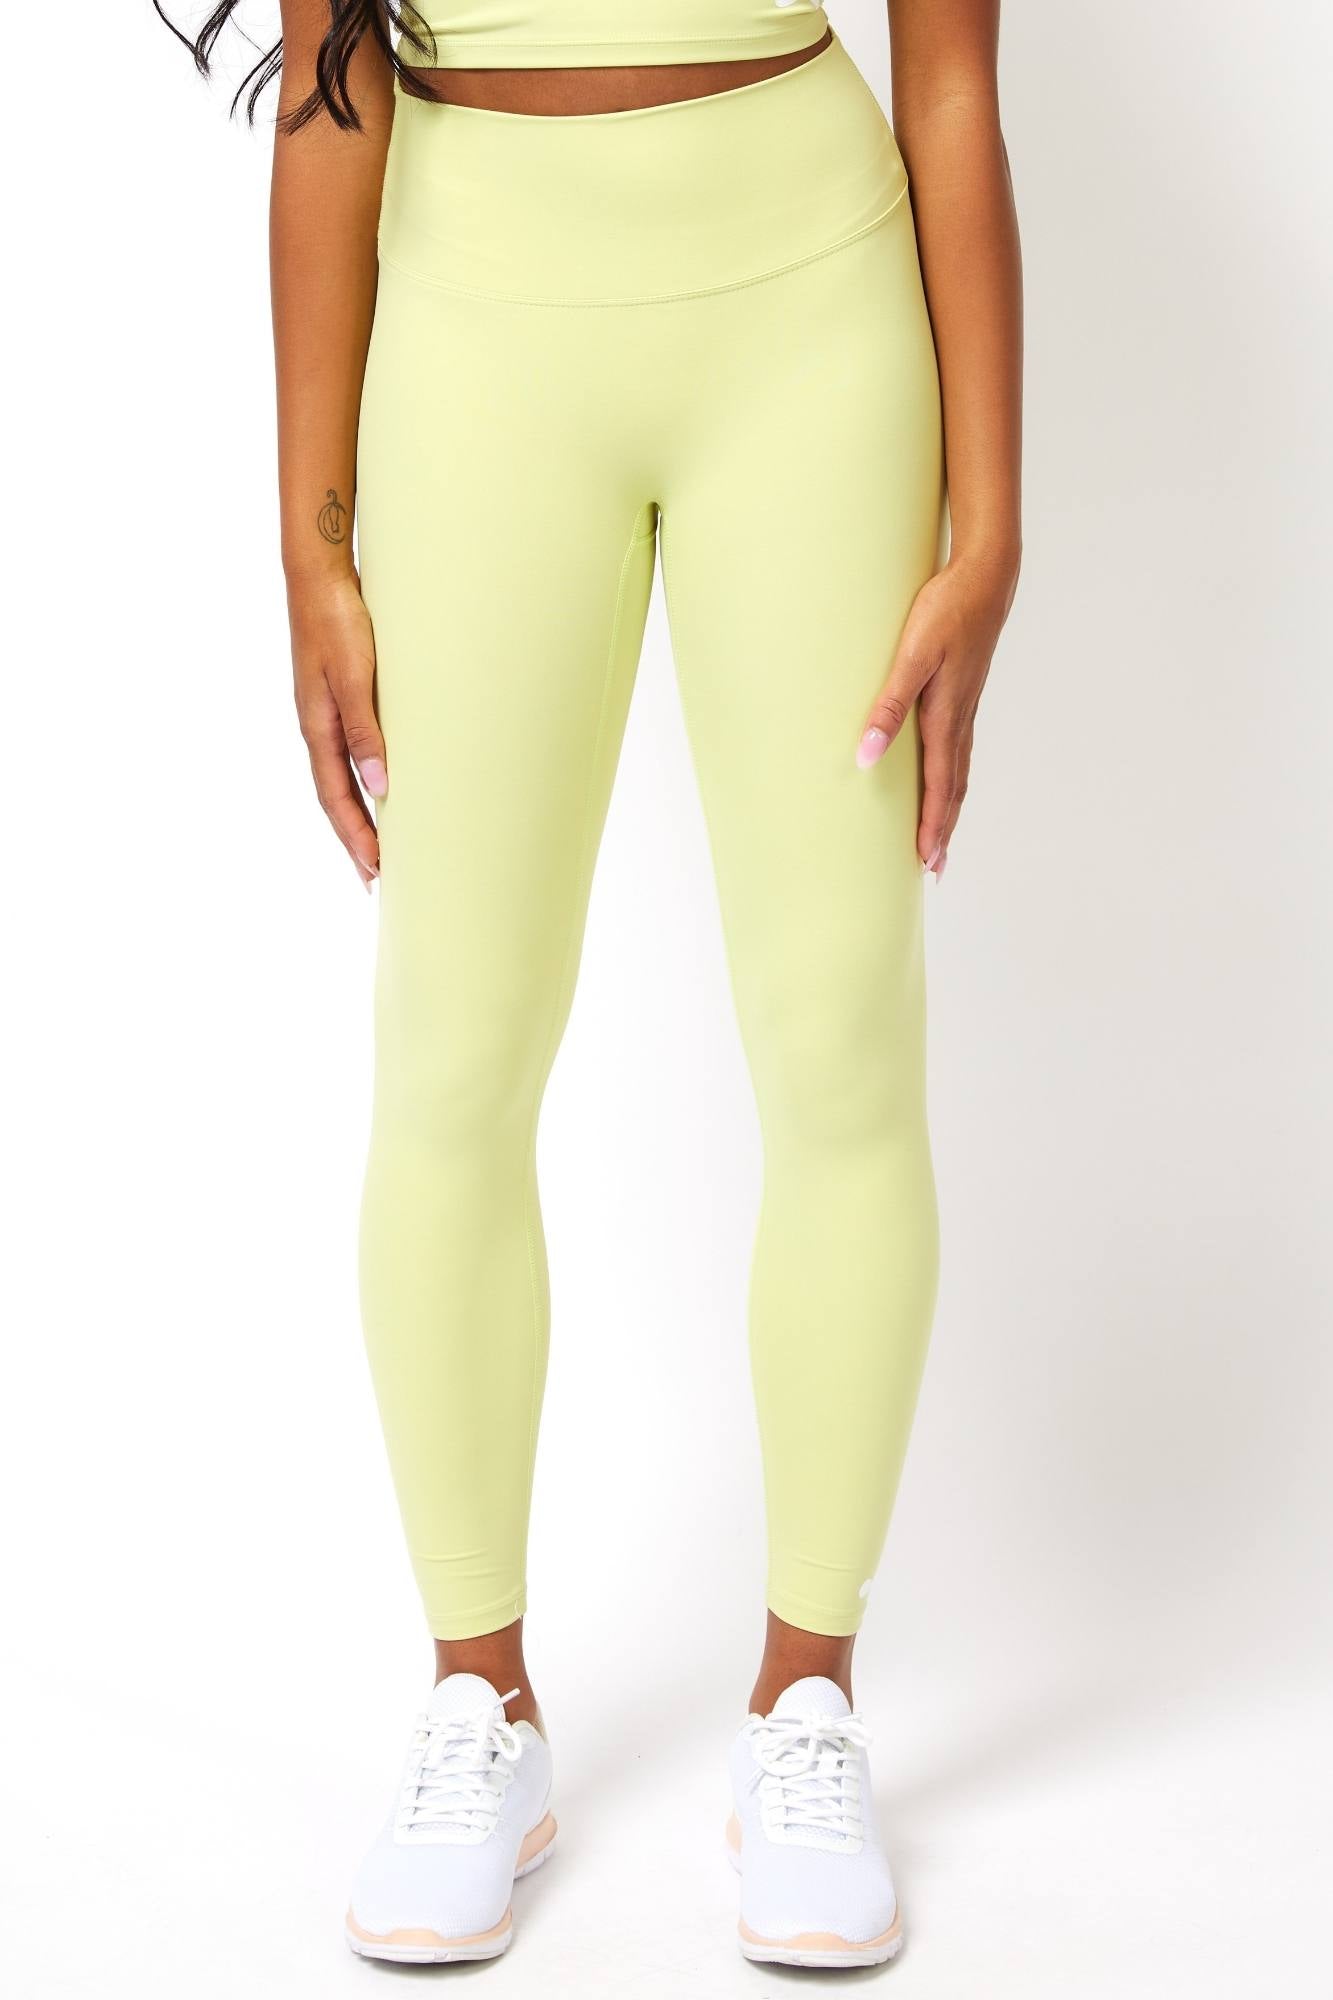 URBANIC Women Lemon Yellow & Black Dyed Gym Tights Price in India, Full  Specifications & Offers | DTashion.com